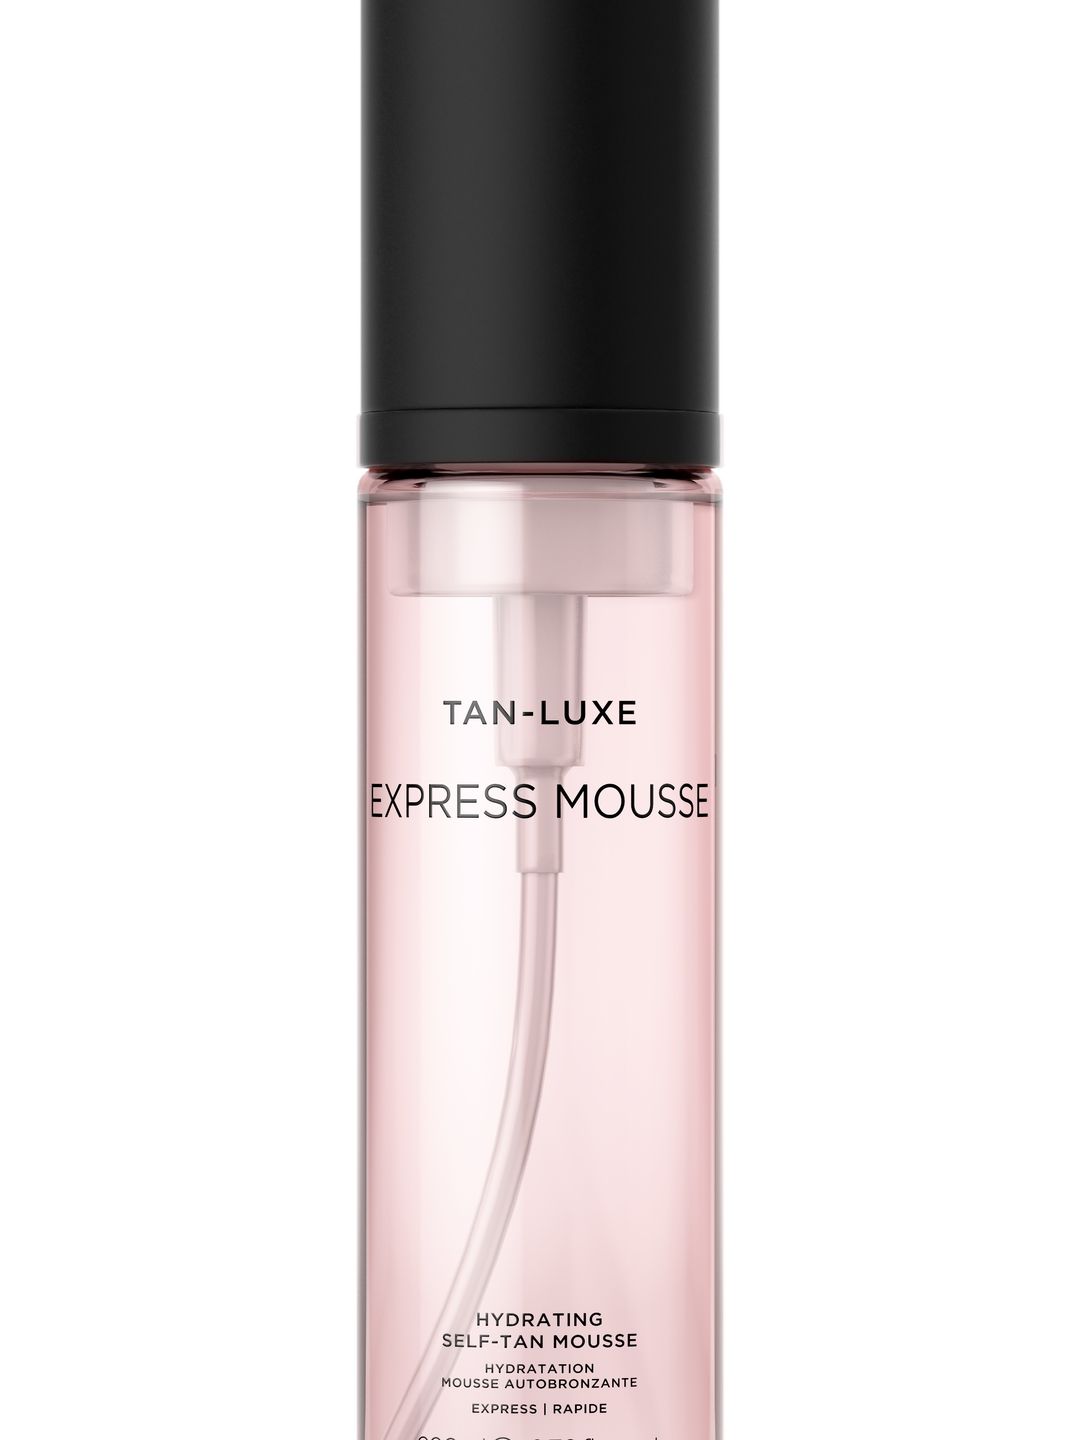 Tan-Luxe Express Mousse, £37